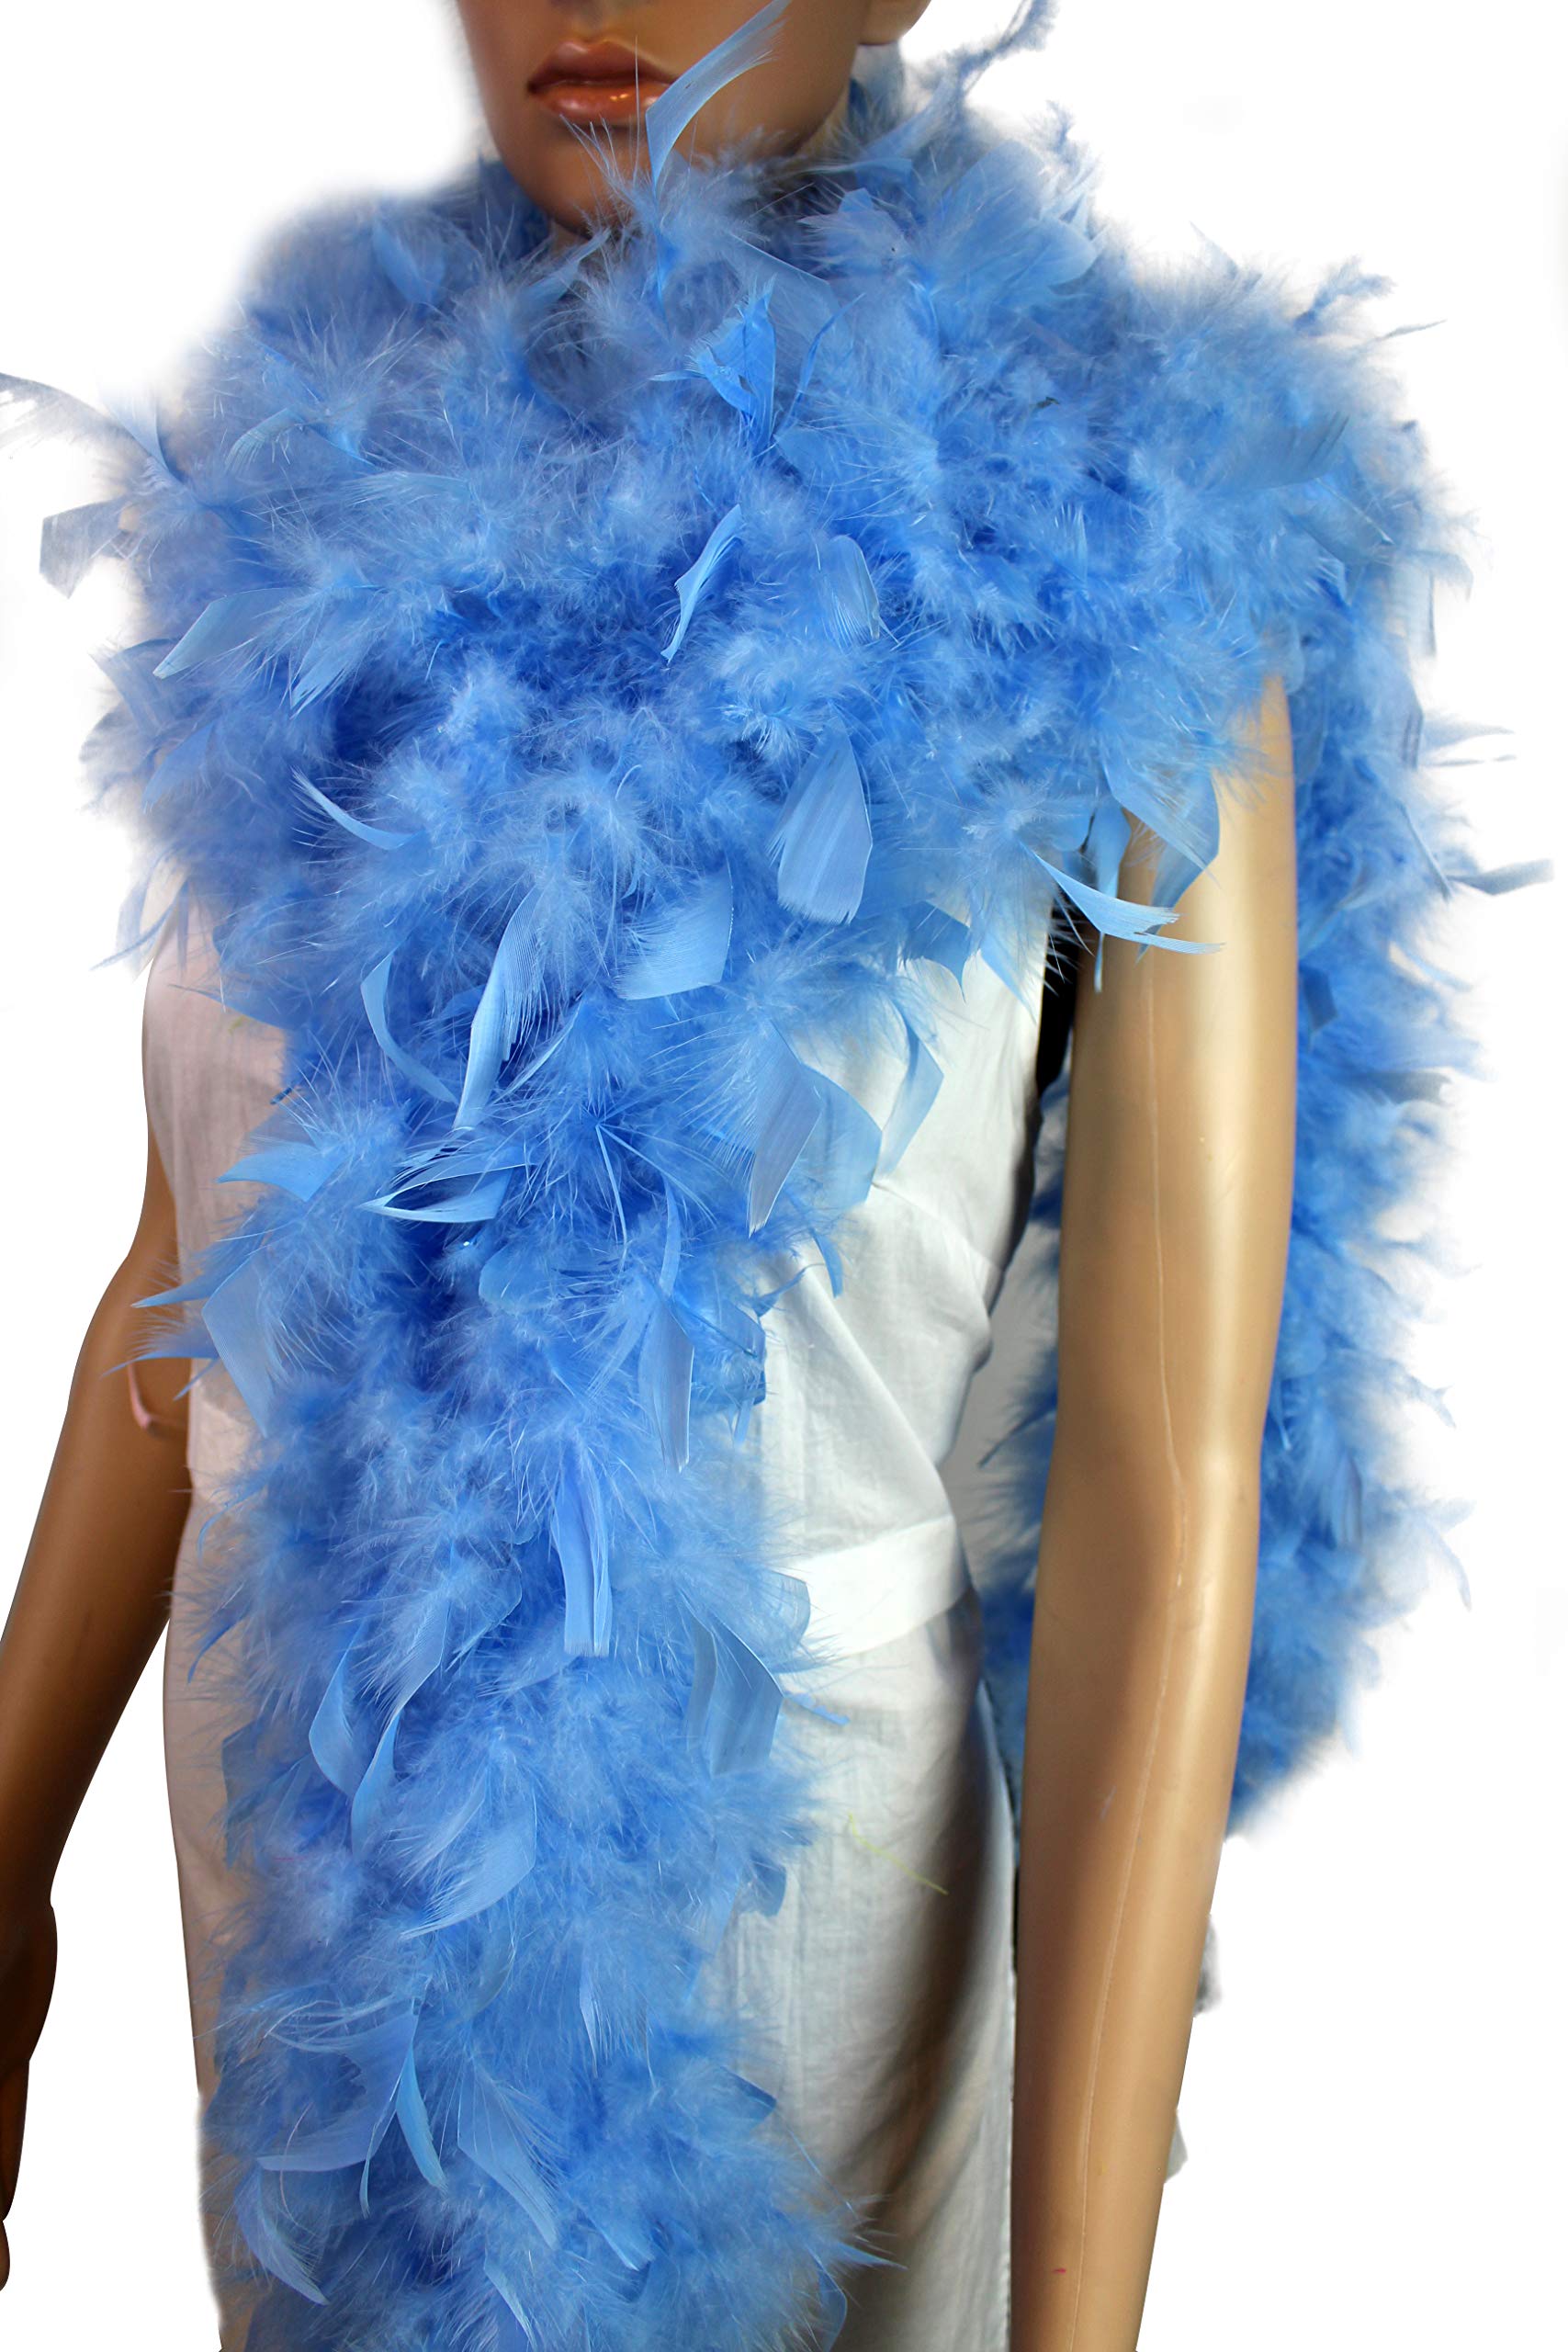 flydreamfeathers Baby Blue Color 100 Gram Chandelle Feather Boa, 2 Yard Long-Great for Party, Wedding, Costume